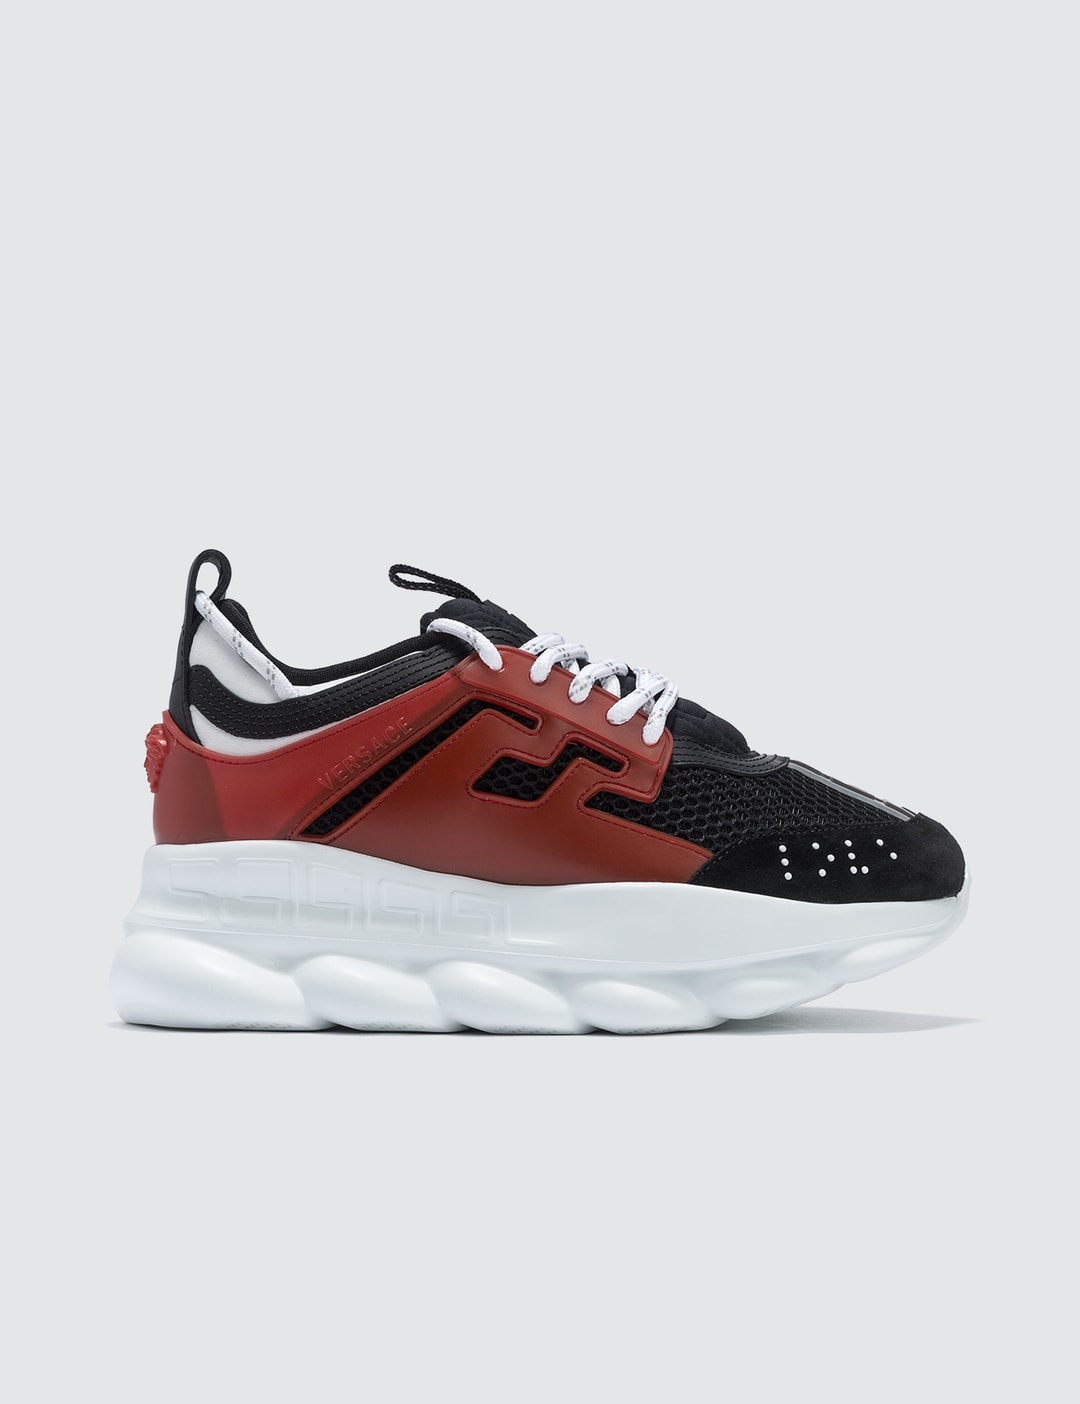 Versace - Chain Reaction Sneakers | HBX - Globally Curated Fashion and ...